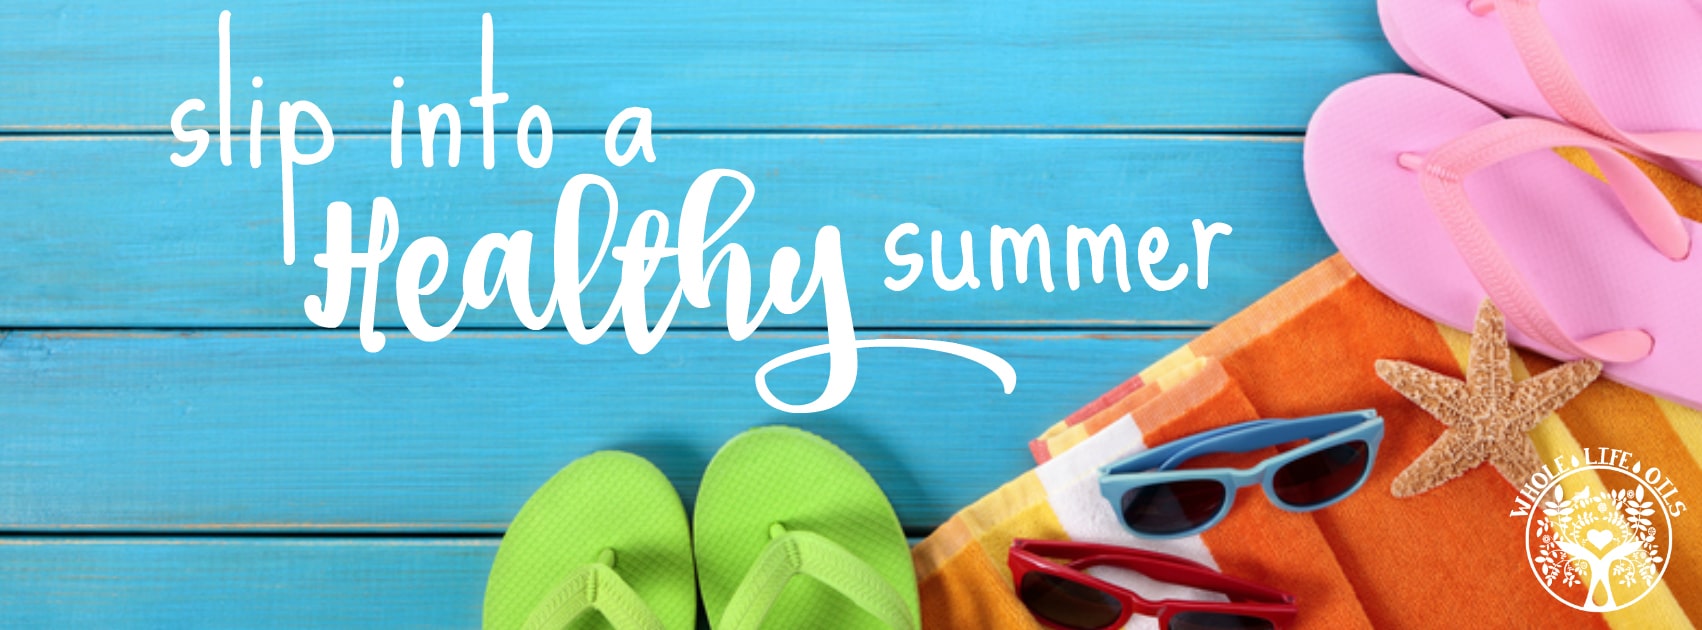 Slip Into A Healthy Summer with Essential Oils!